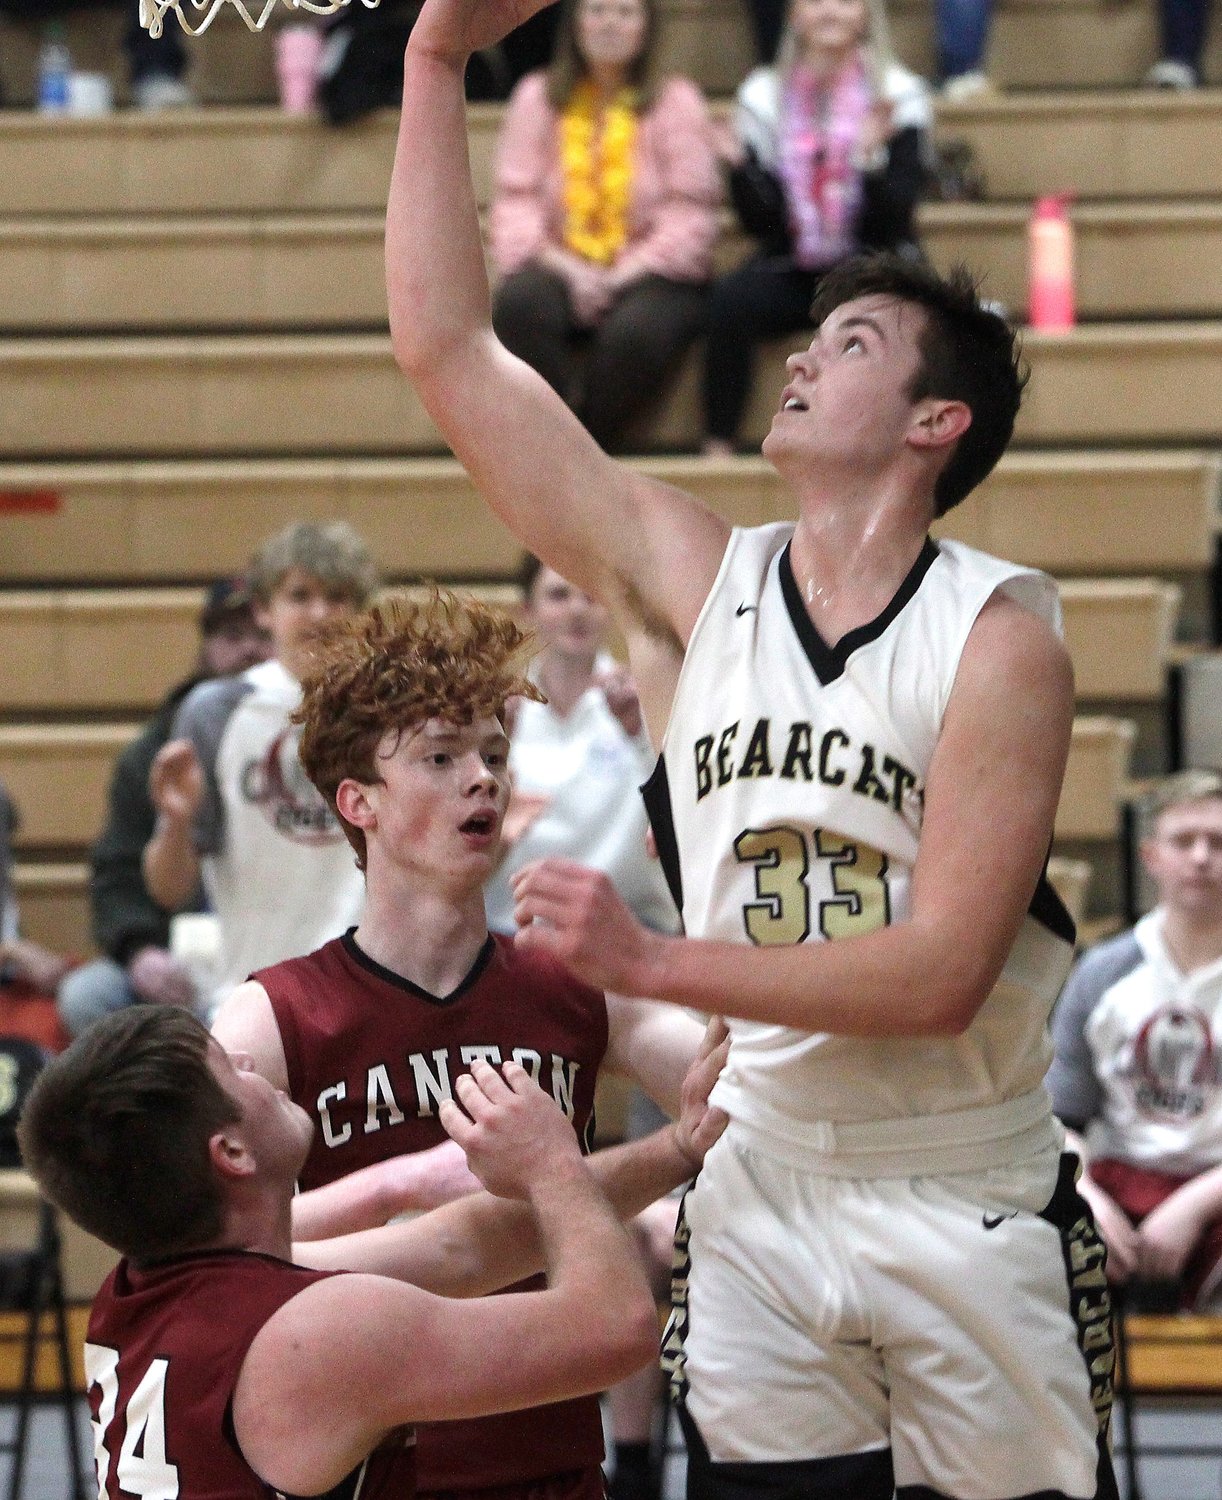 Cairo senior Bryce Taylor (#33) scored nine points Tuesday when the Bearcats lost a tough 57-56 decision to Wellsville-Middletown at the buzzer of a Class 2 sectional playoff contest.